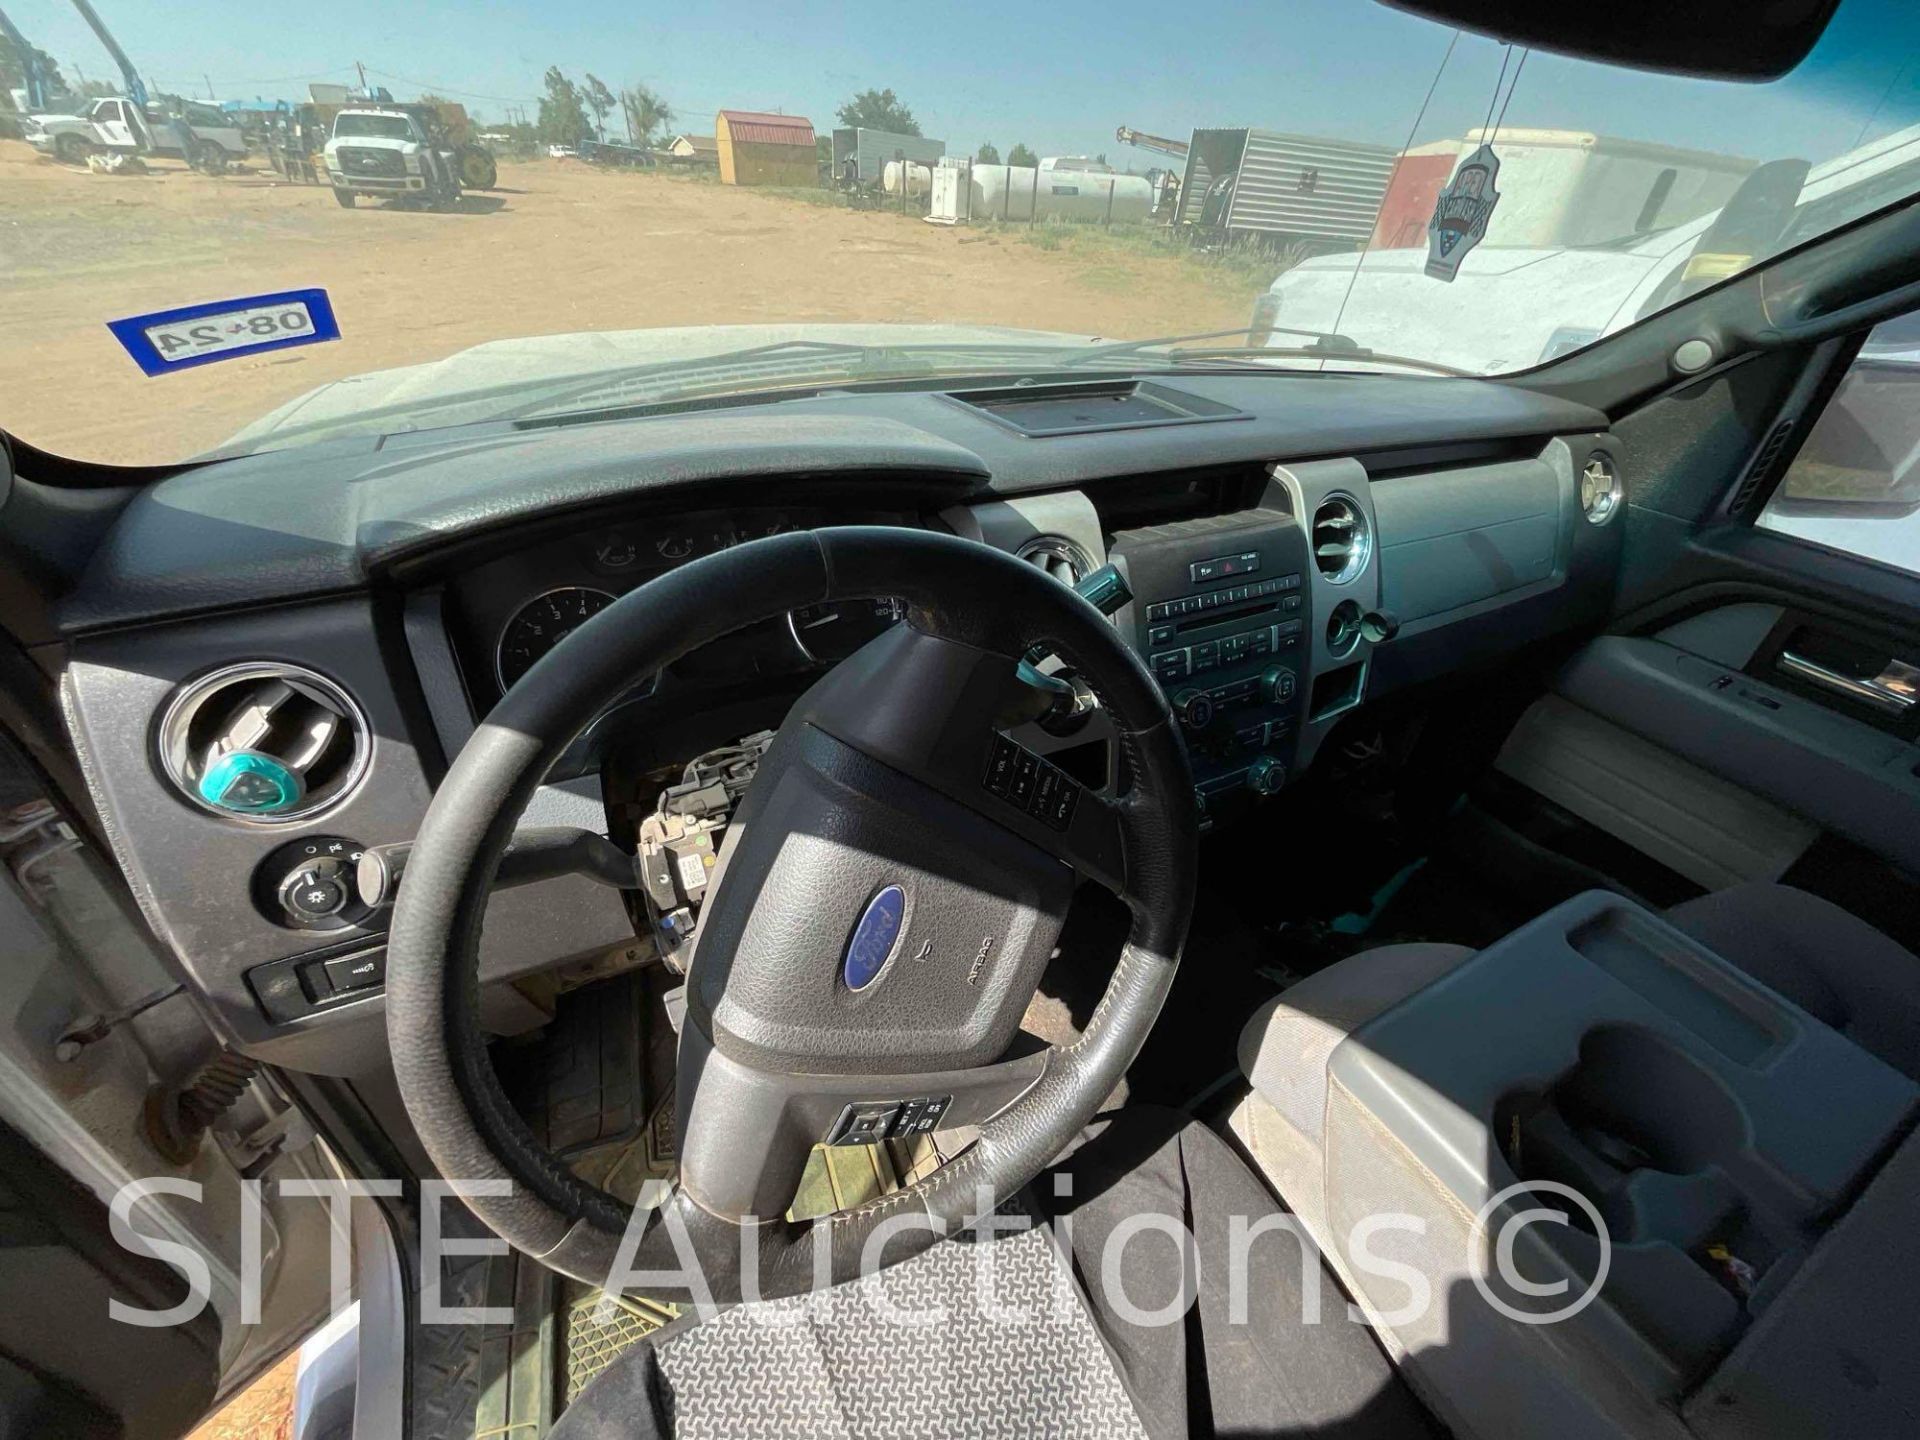 2012 Ford F150 Crew Cab Pickup Truck - Image 16 of 18